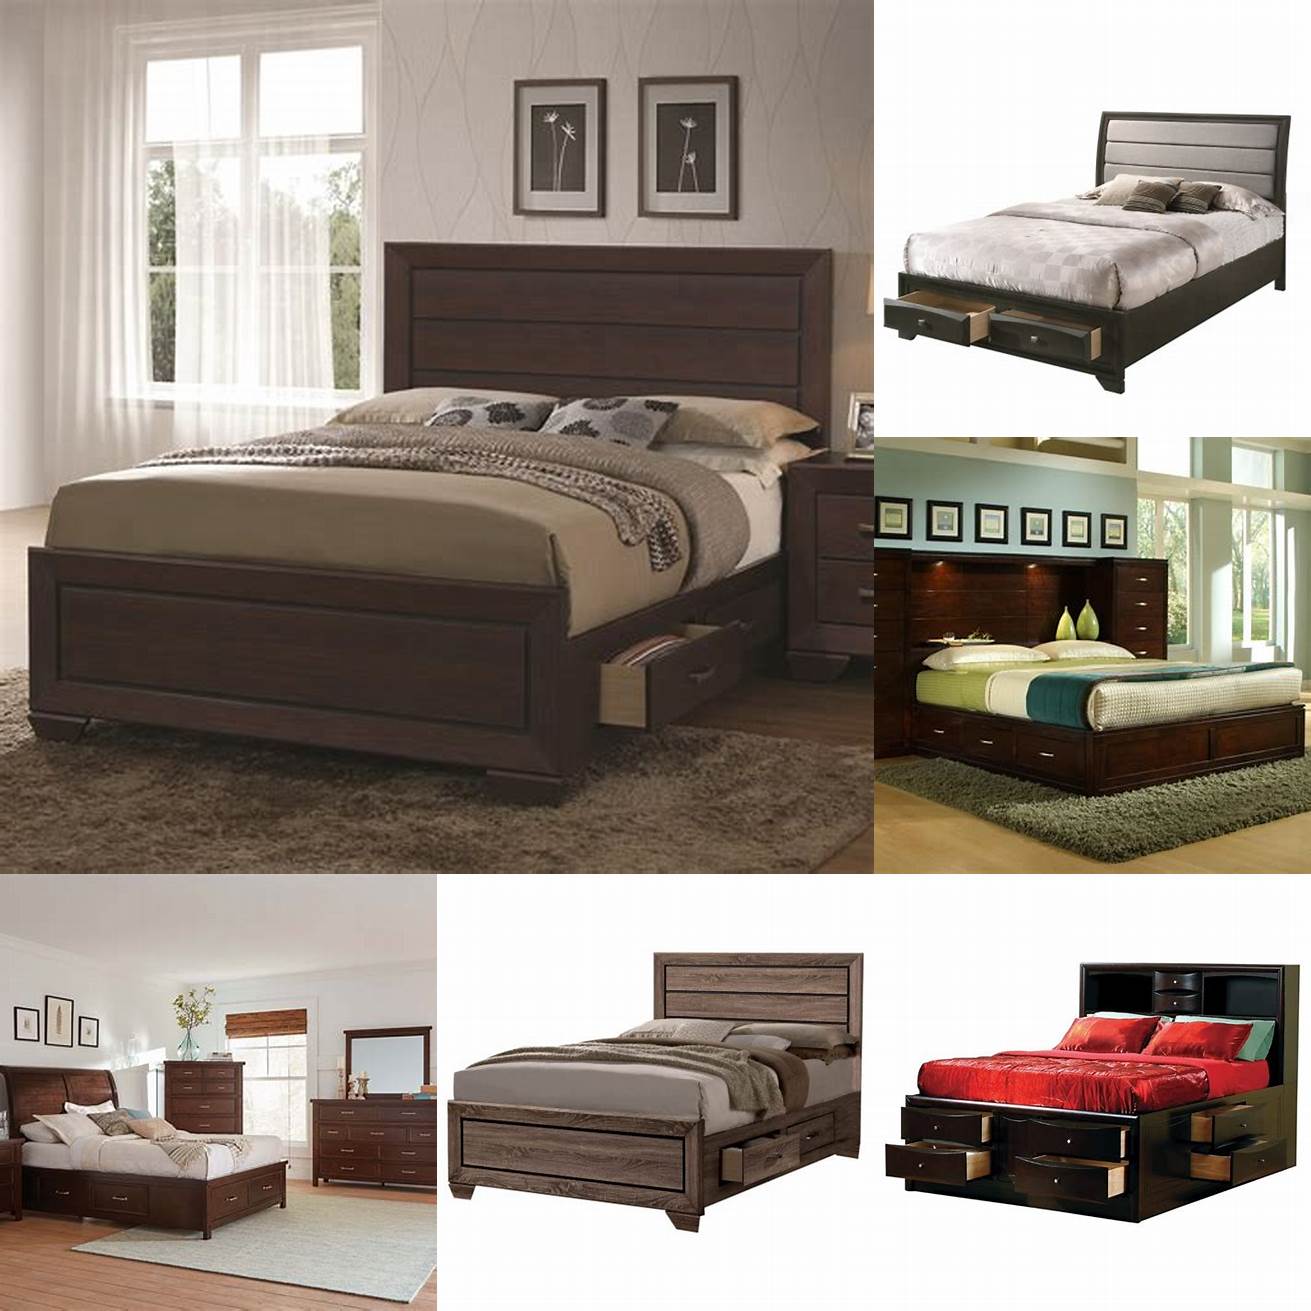 A practical Storage Eastern King Bed with built-in drawers